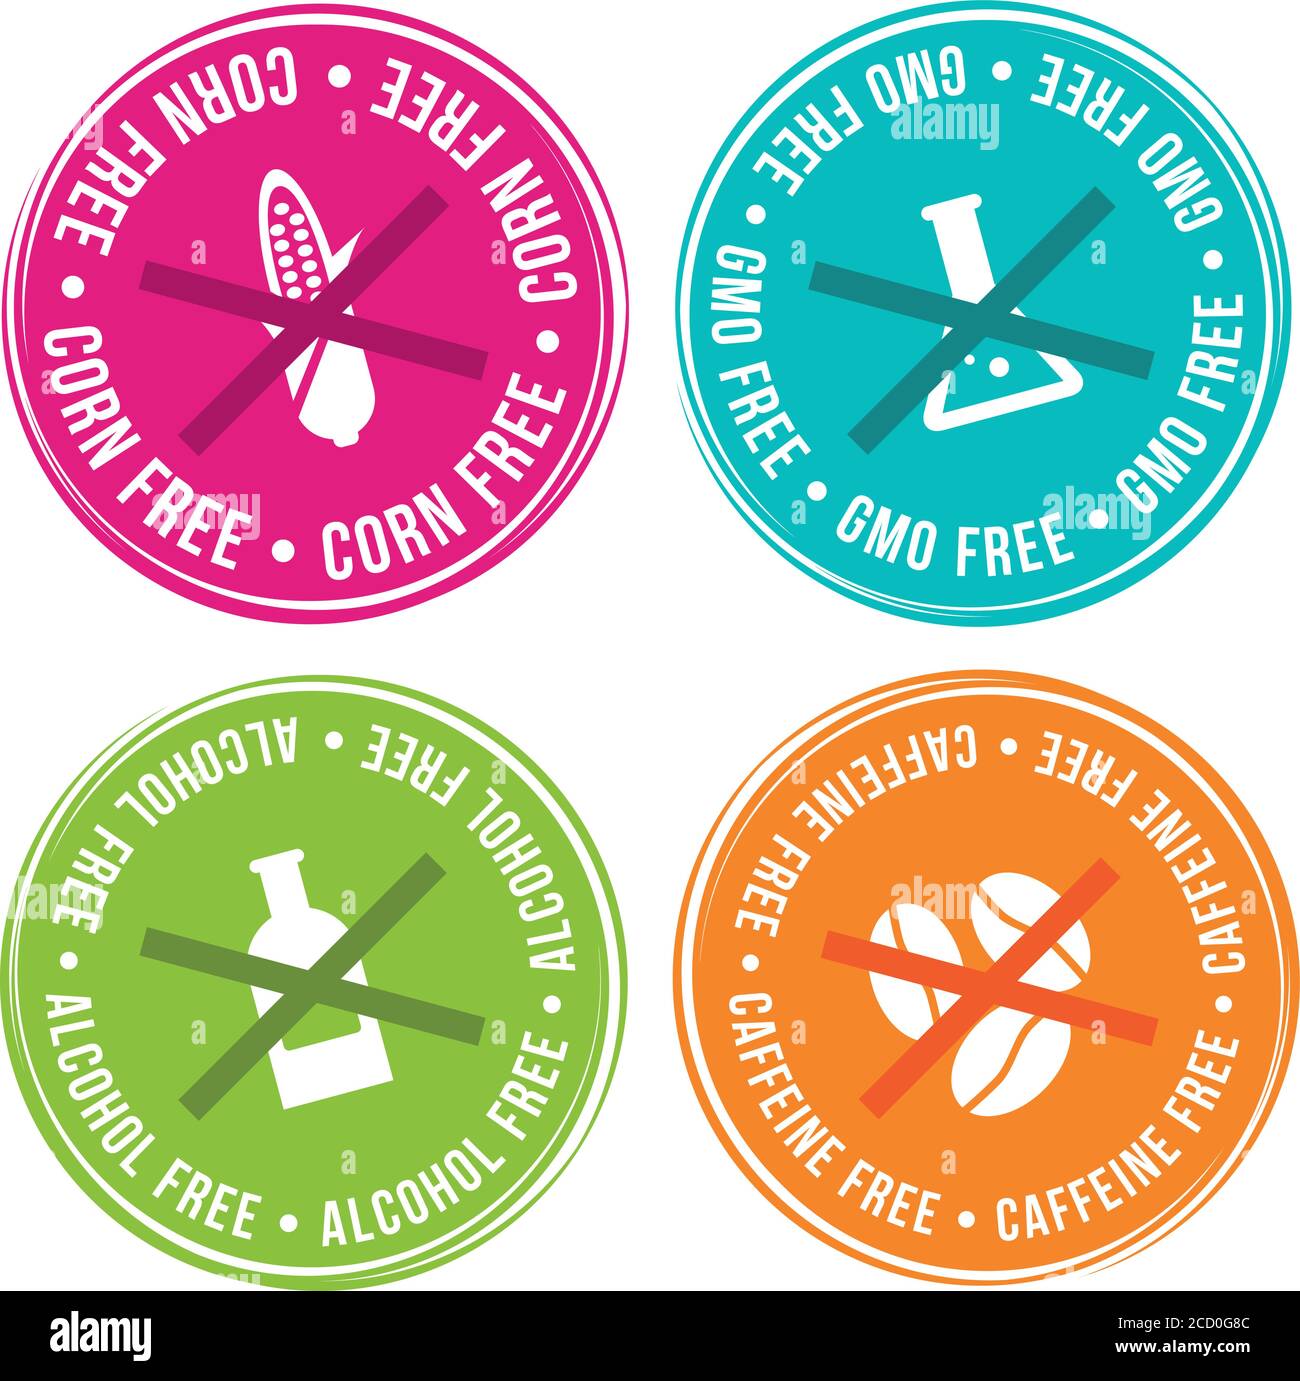 xICorn free, GMO free, Alcohol free and Caffeine free Badges. Eps10 Vector. Stock Vector